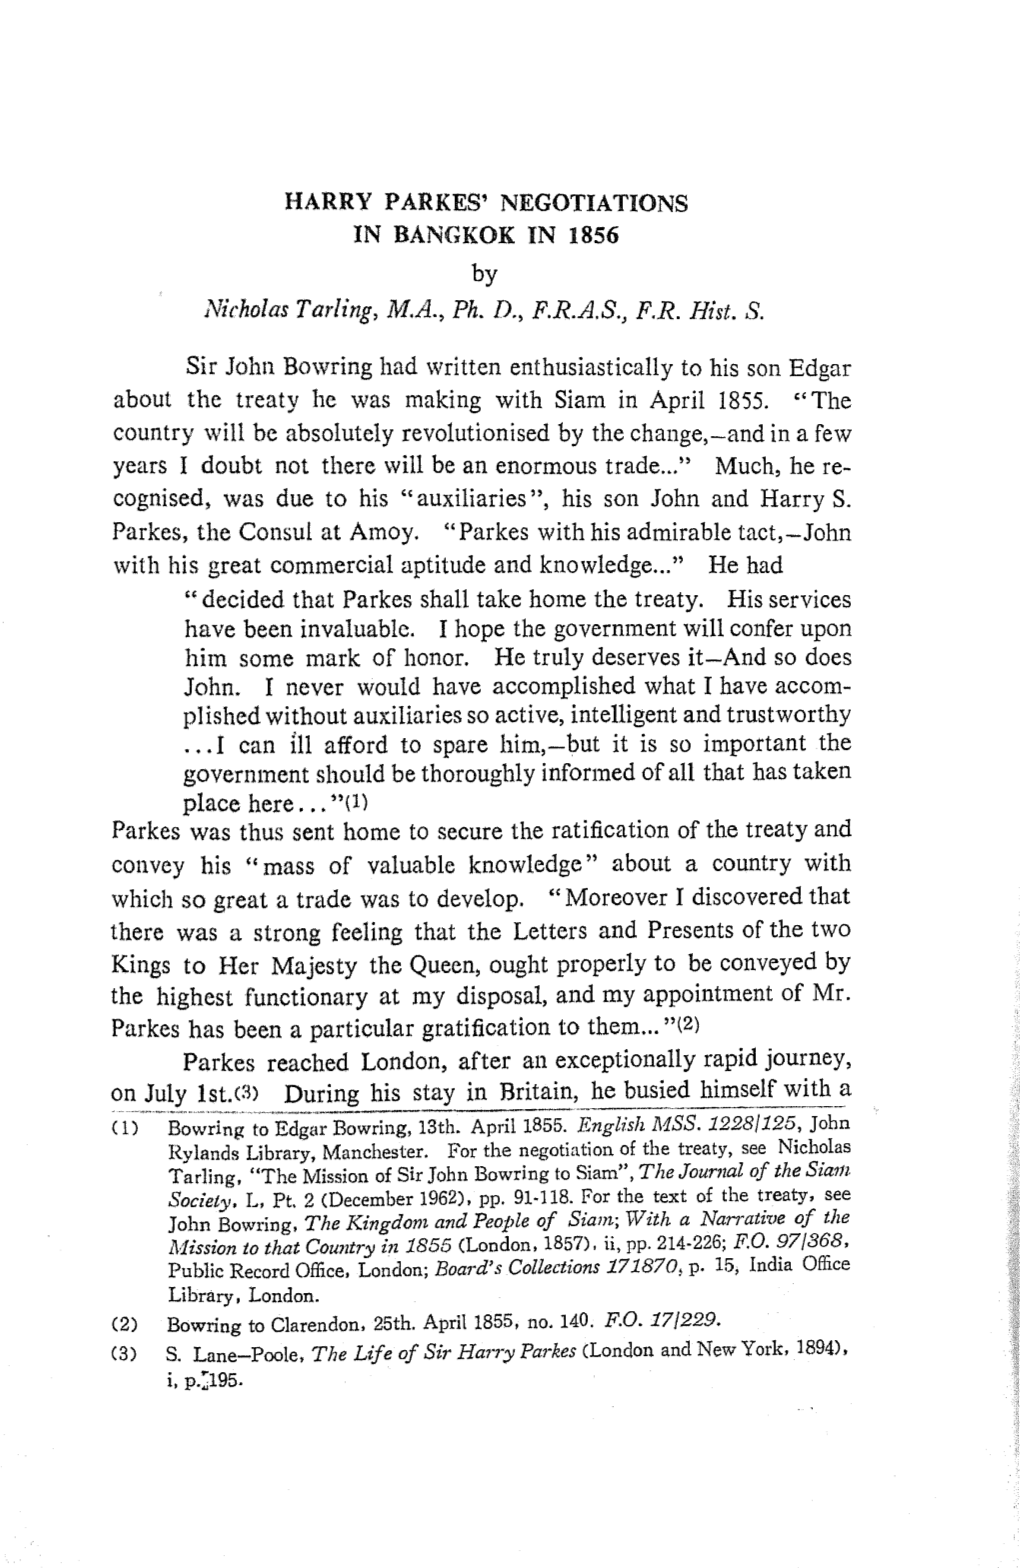 HARRY PARKES' NEGOTIATIONS in BAN(Ikok in 1856 by Nicholas Tarling, M.A., Ph. D., F.R.A.S.} F.R. Hist. S. Sir John Bowring Had W